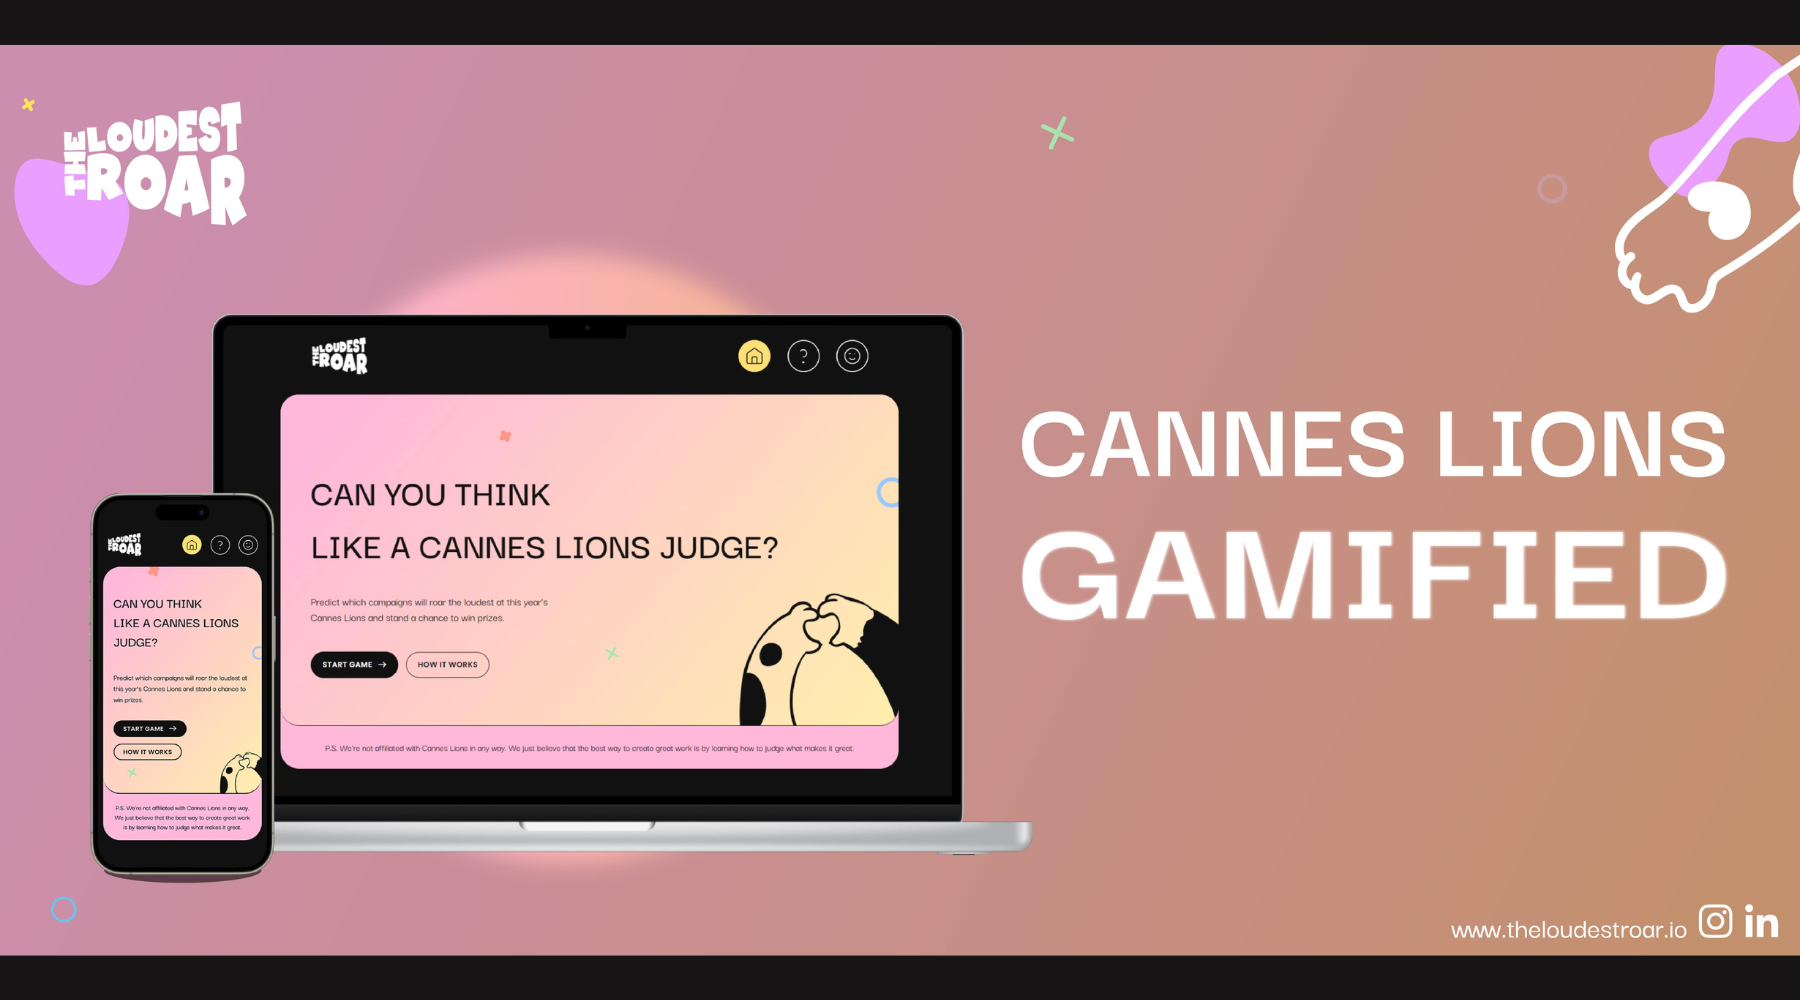 The Loudest Roar Makes a Return for the 71st Edition of Cannes Lions